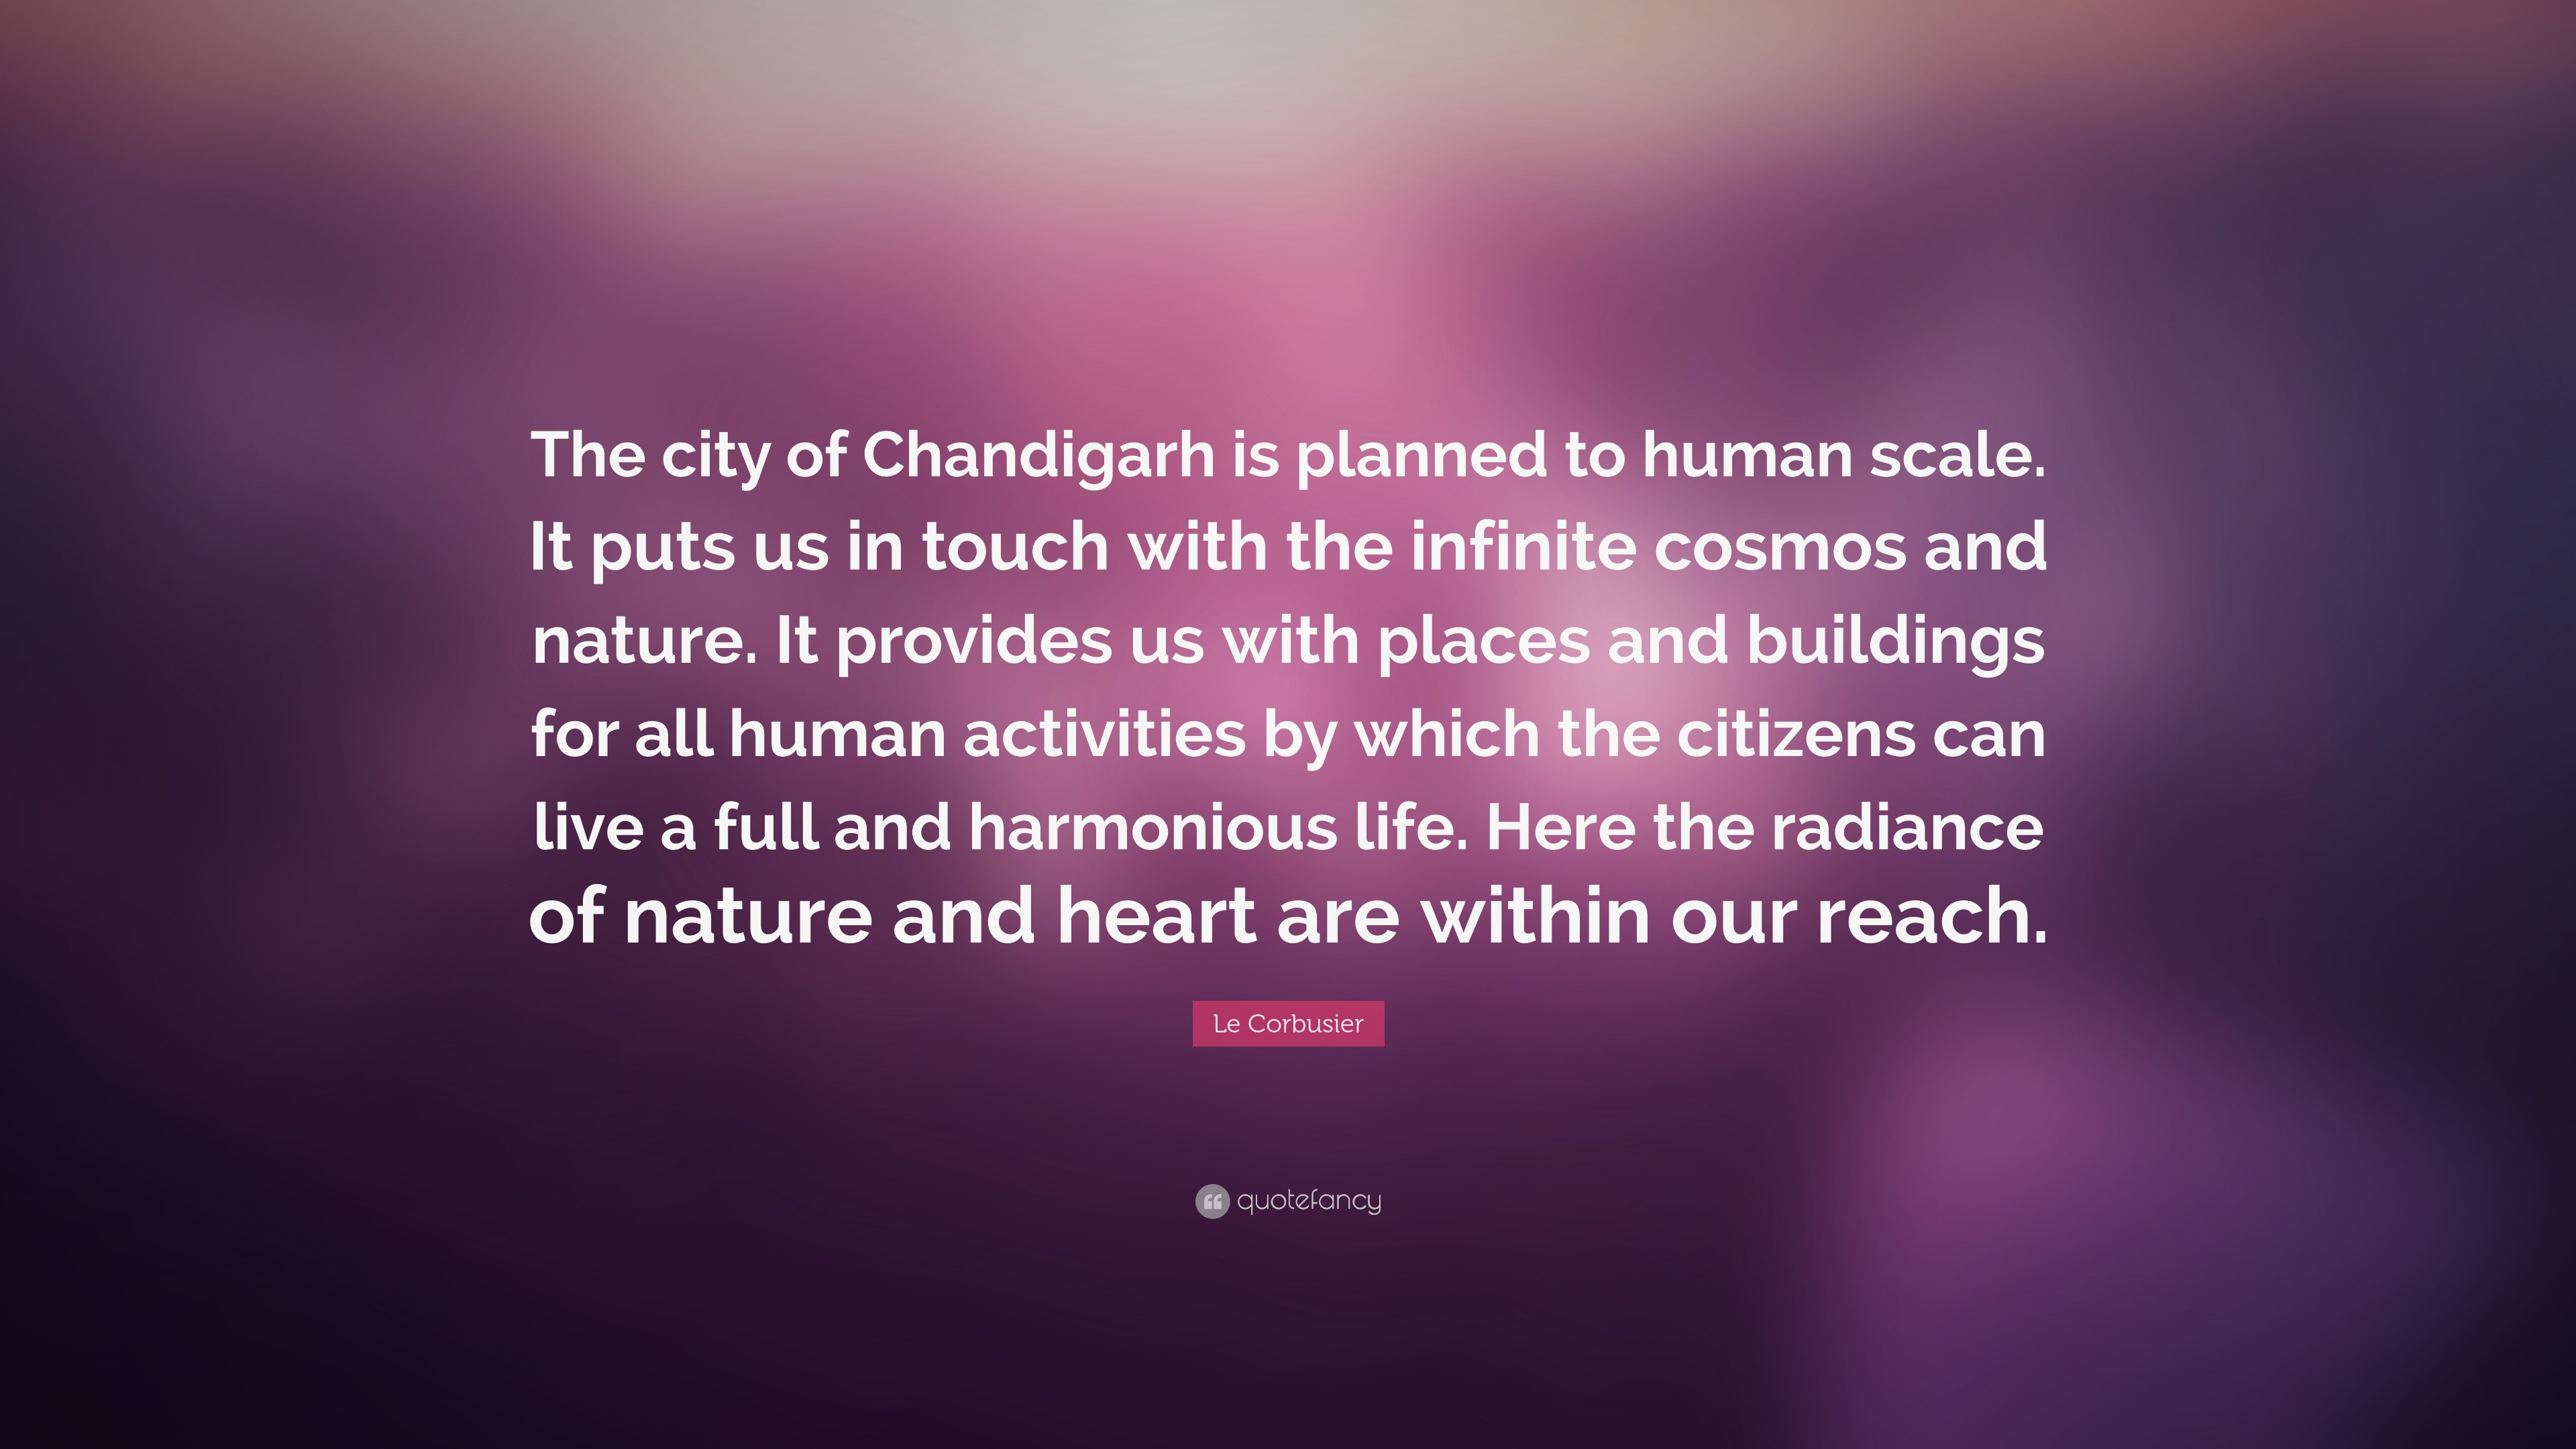 Le Corbusier Quote: “The city of Chandigarh is planned to human